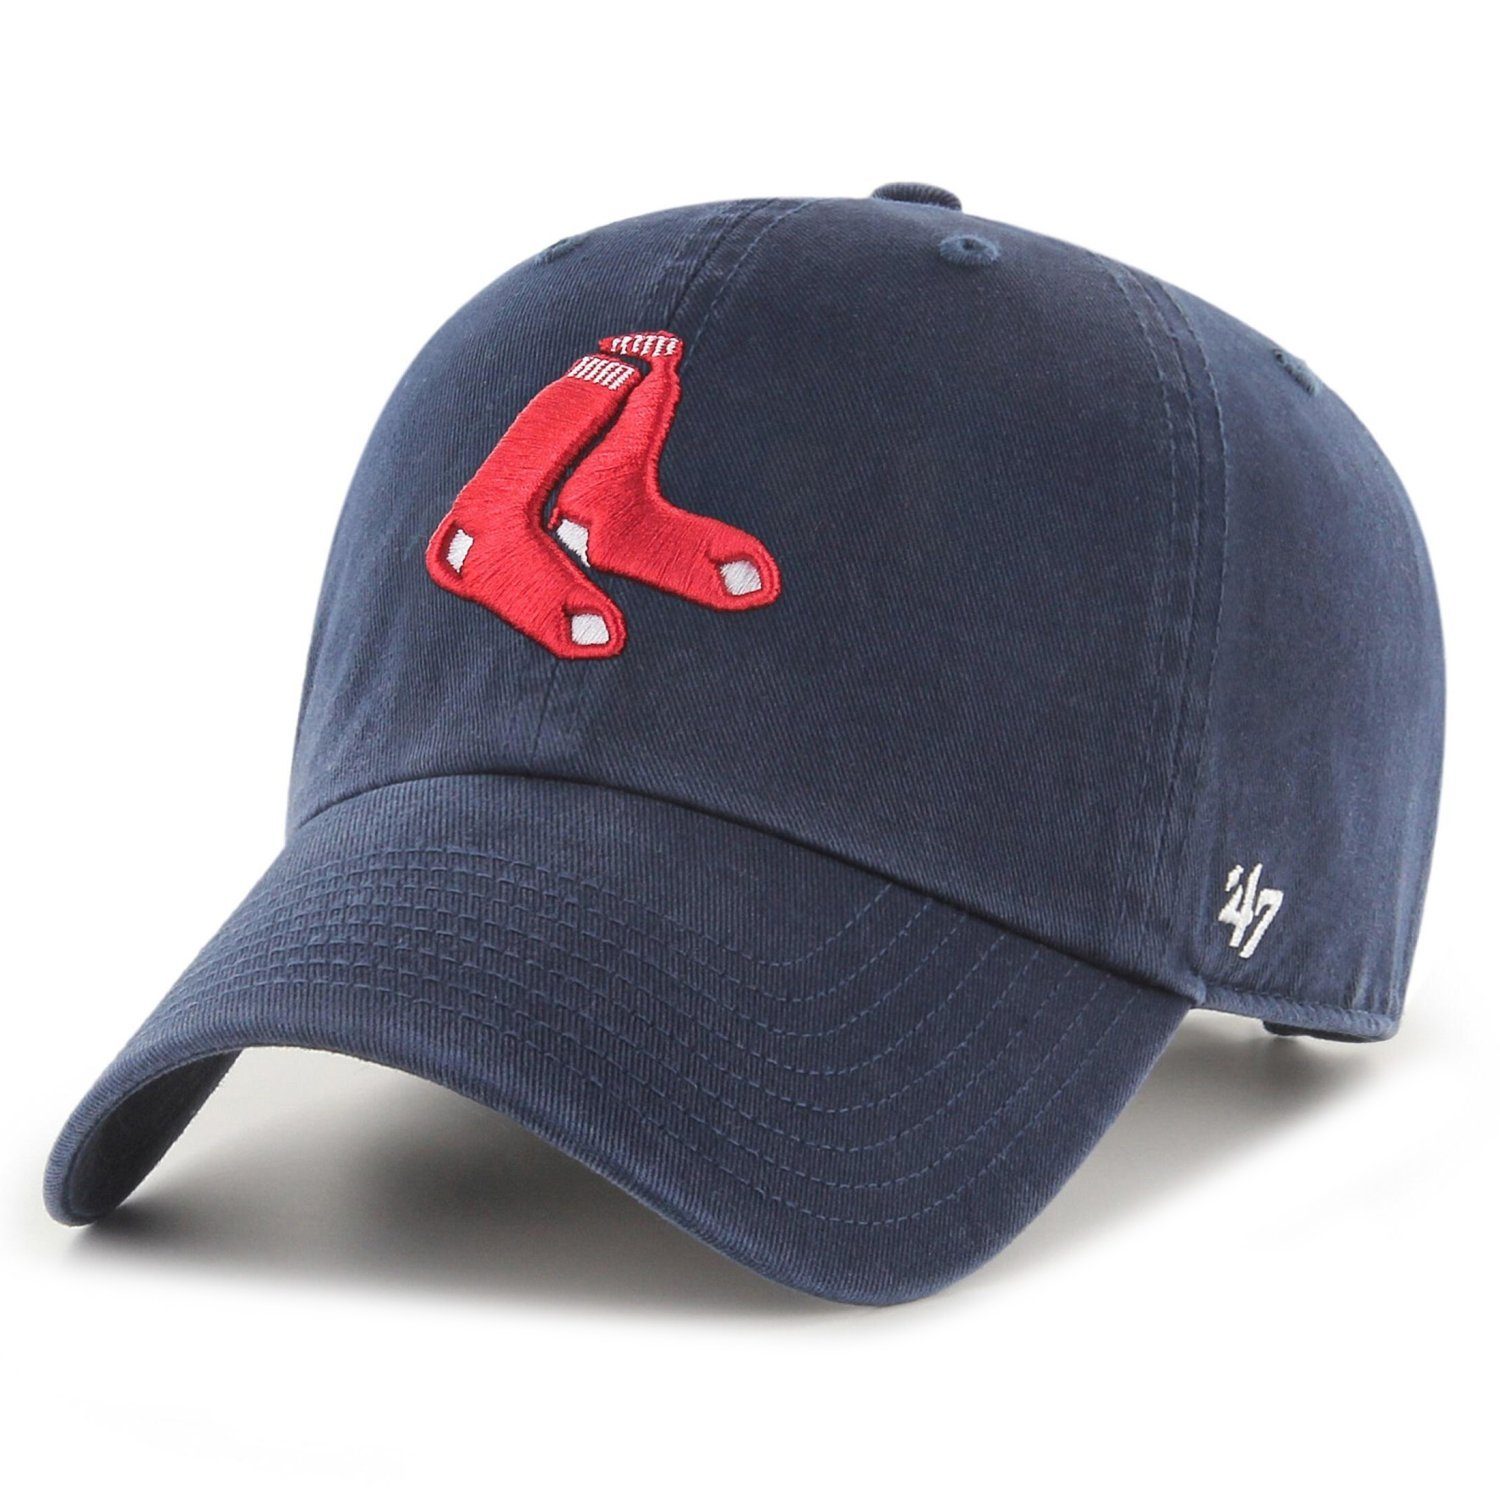 MLB Fit Boston Brand Relaxed Sox Trucker UP Cap CLEAN '47 Red